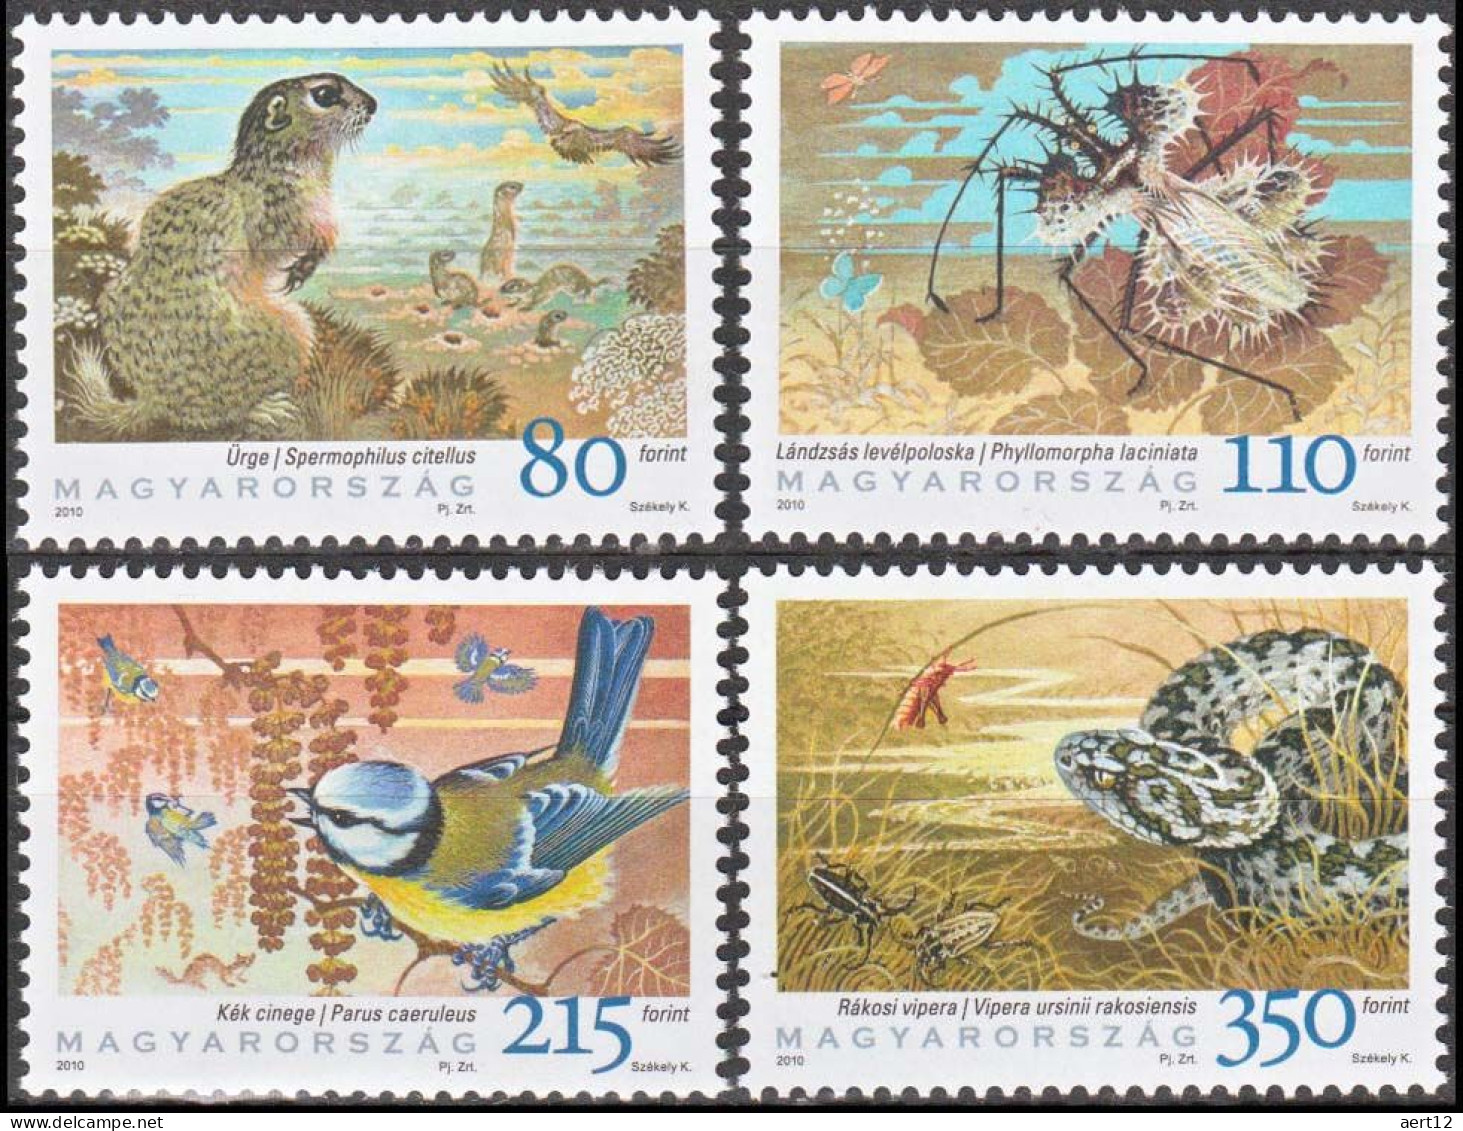 2010, Hungary, Biodiversity, Birds, Insects, Rodents, Snakes, Squirrels, 4 Stamps, MNH(**), HU 5473-76 - Schlangen